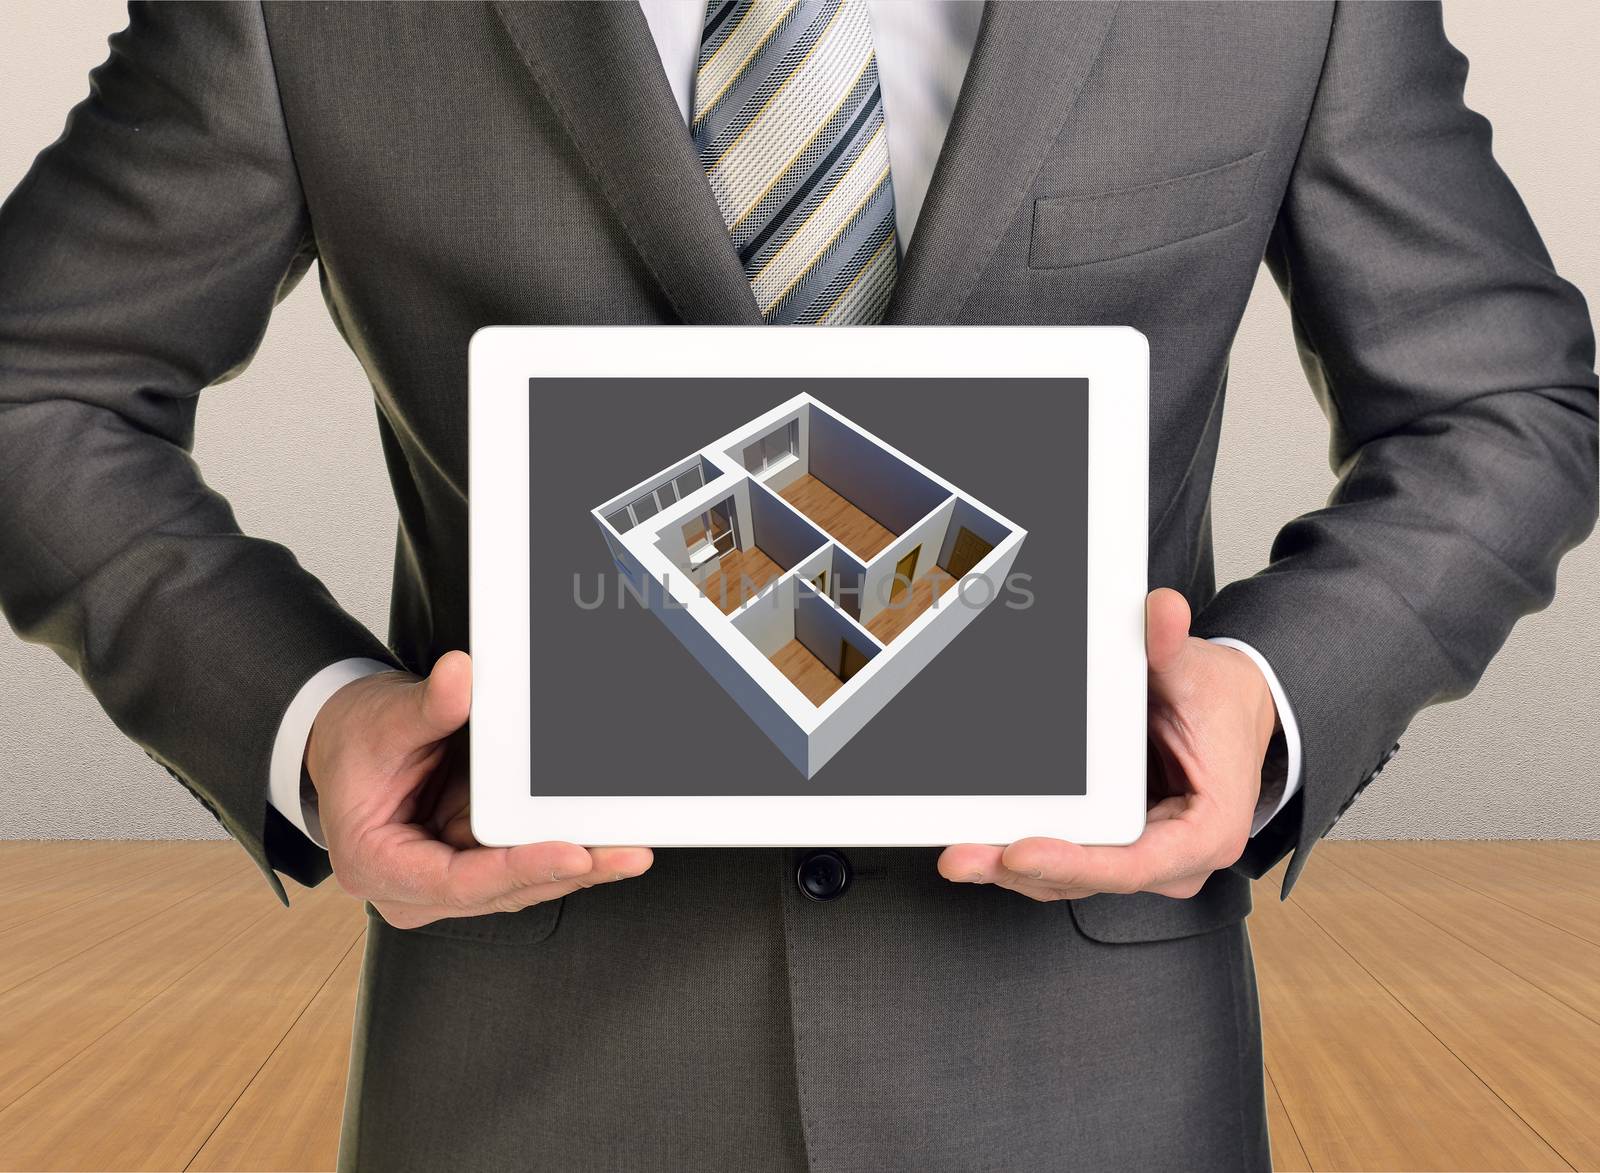 Three-dimensional model of house in tablet screen. Man holding tablet. Wooden floor and gray wall in background